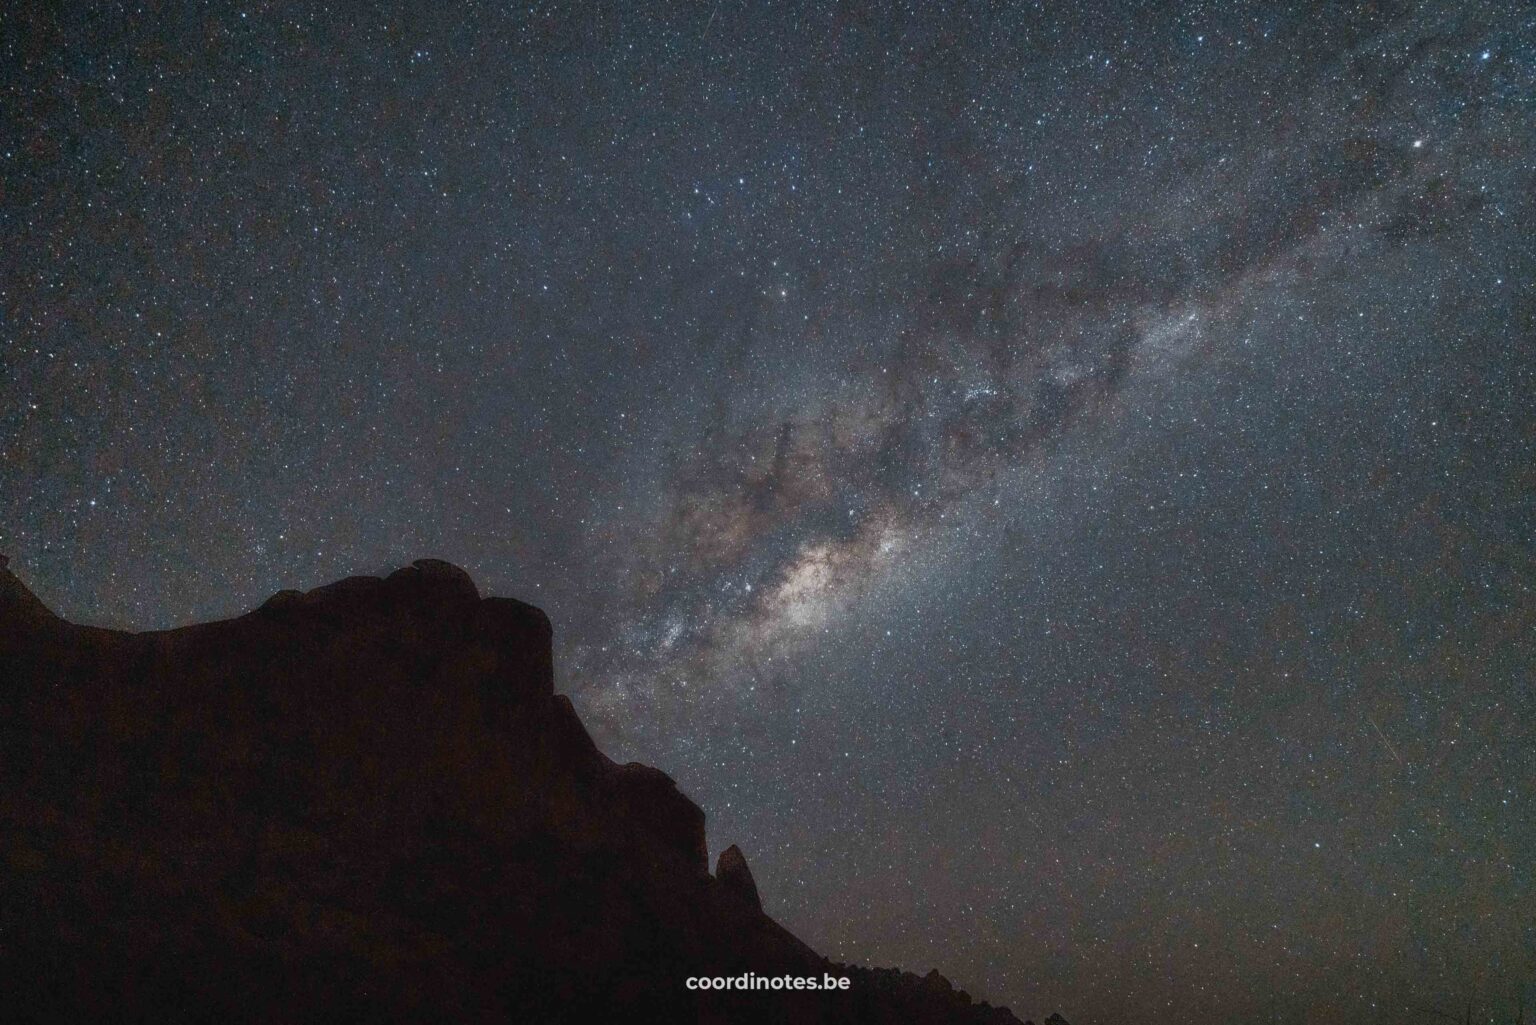 There is hardly any light pollution here, so it is ideal for seeing and photographing the Milky Way at night.